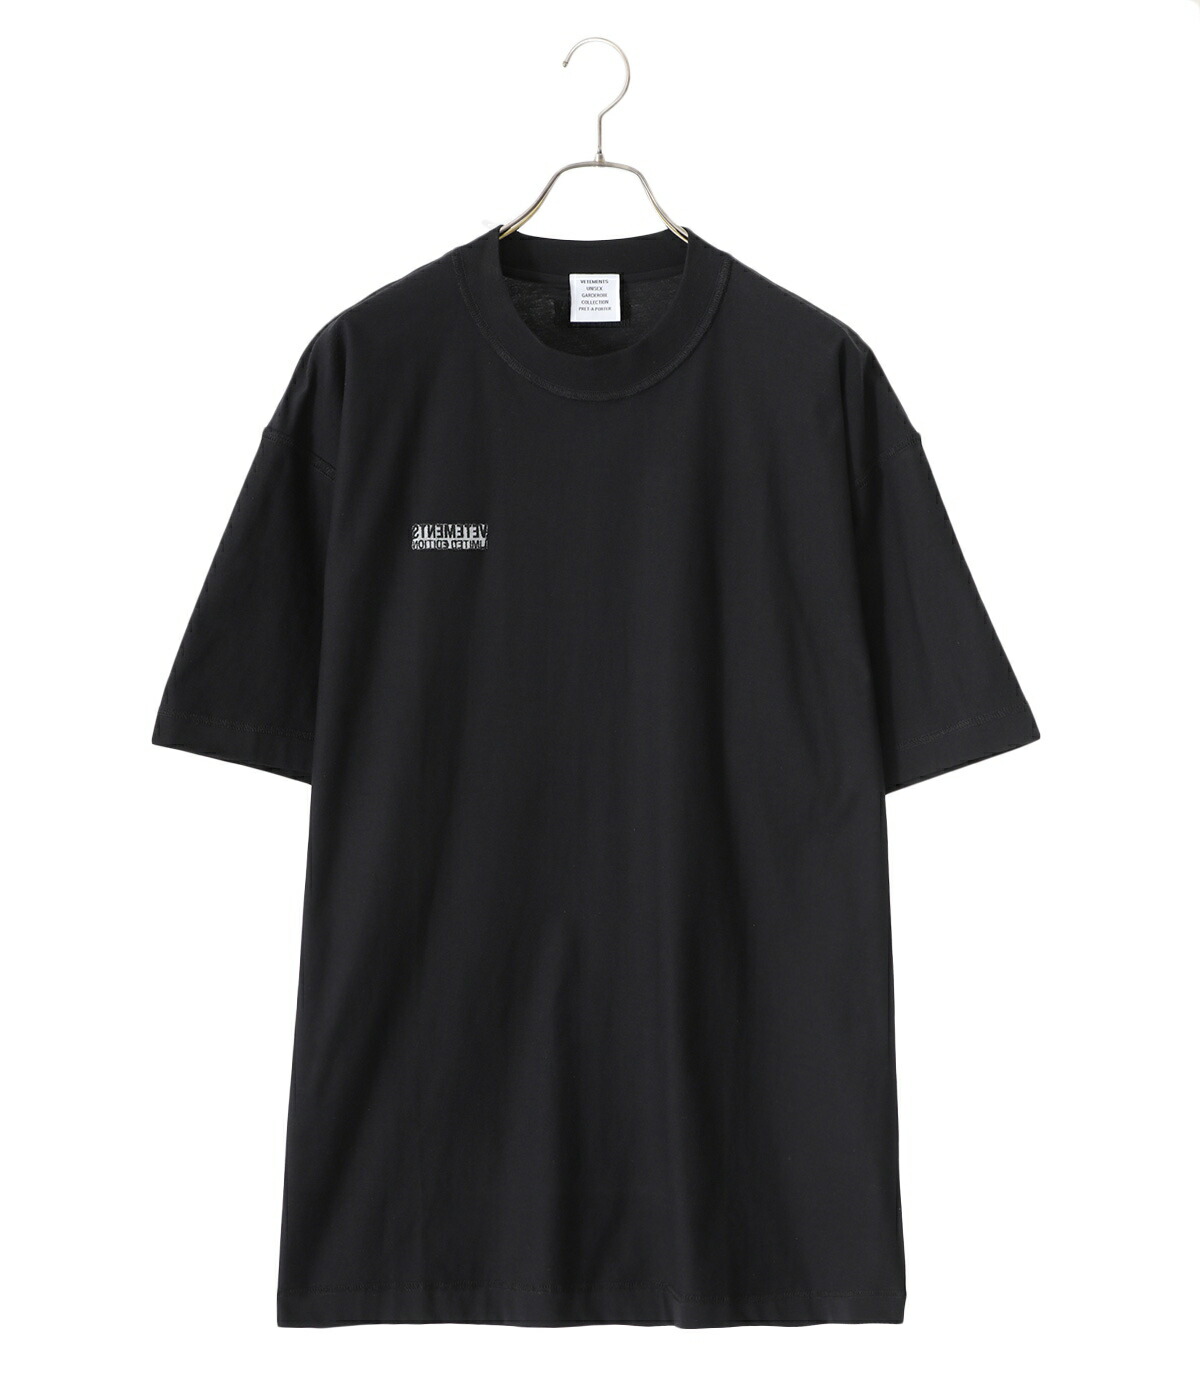 10%OFF】VETEMENTS / ヴェトモン ： ALL BLACK INSIDE-OUT T-SHIRT